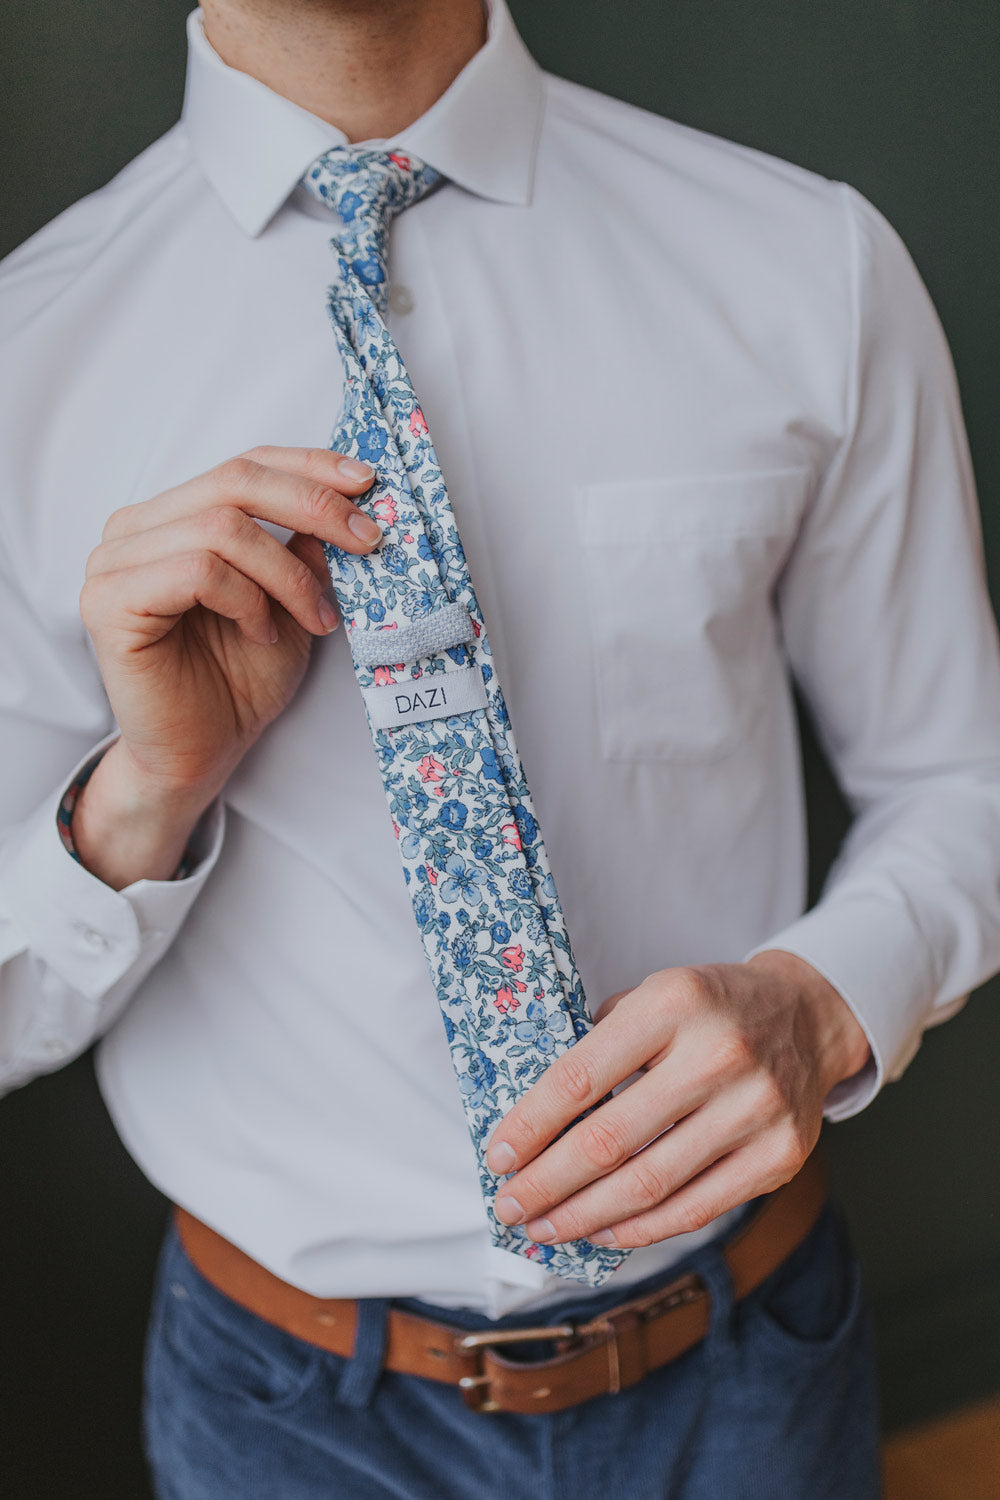 Spring Bloom tie worn with a white shirt, brown belt and navy blue pants.